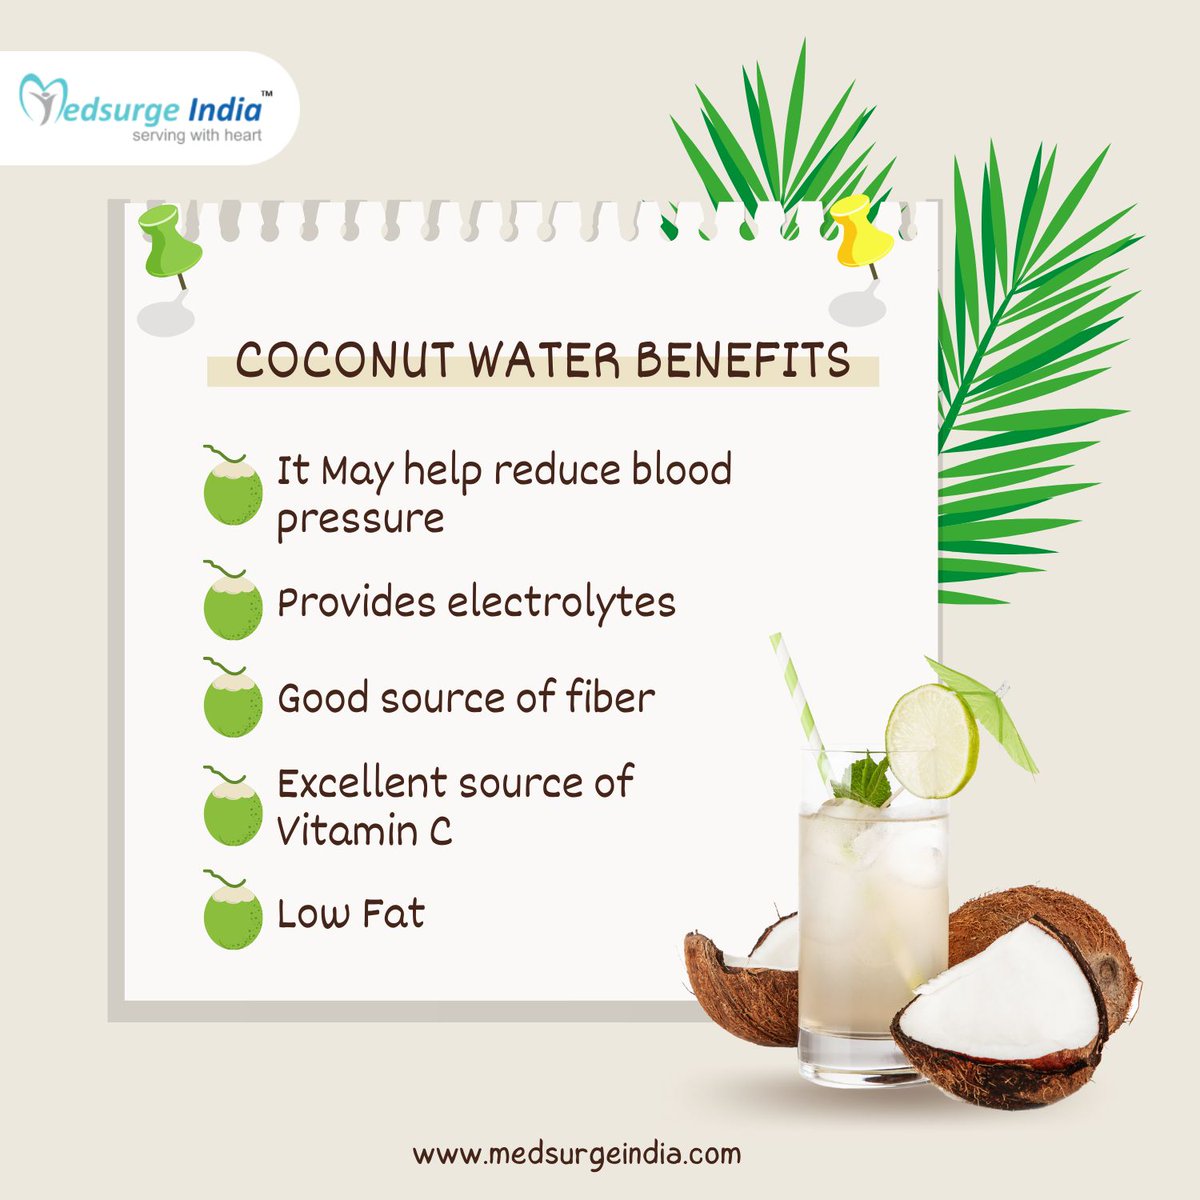 'Beat the heat naturally with the power of Coconut Water! 🥥☀️ Drinking #CoconutWater may help reduce blood pressure, Provides electrolytes, Good source of #fiber, Excellent source of Vitamin C & #LowFat #CoconutWater #SummerRefreshment #HydrationEssentials #medsurgeindia